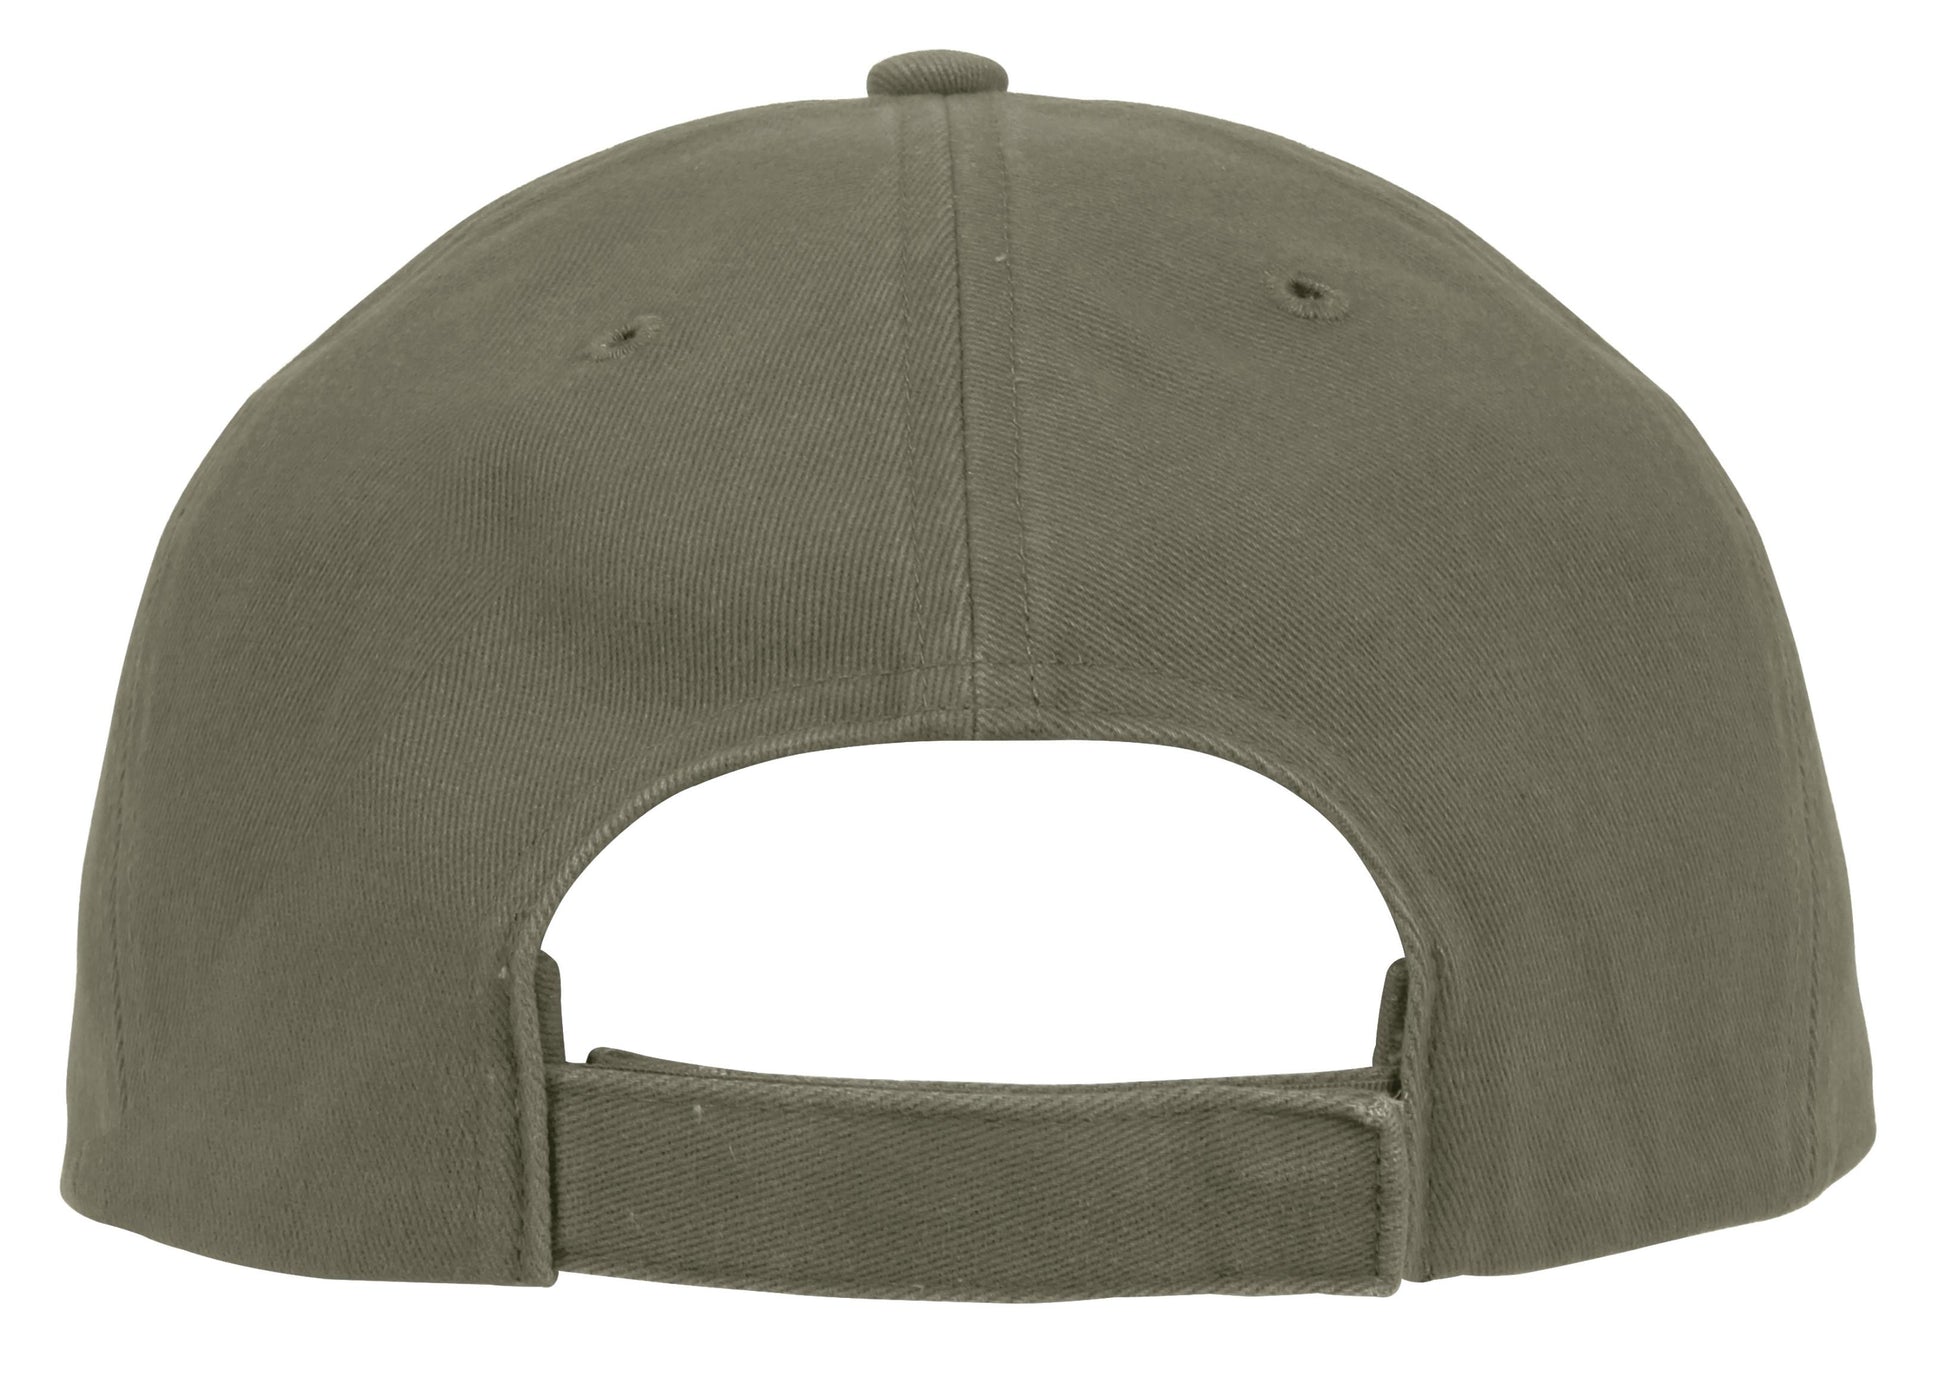 Rothco Vintage Deluxe Army Low Profile Insignia Cap - Tactical Choice Plus